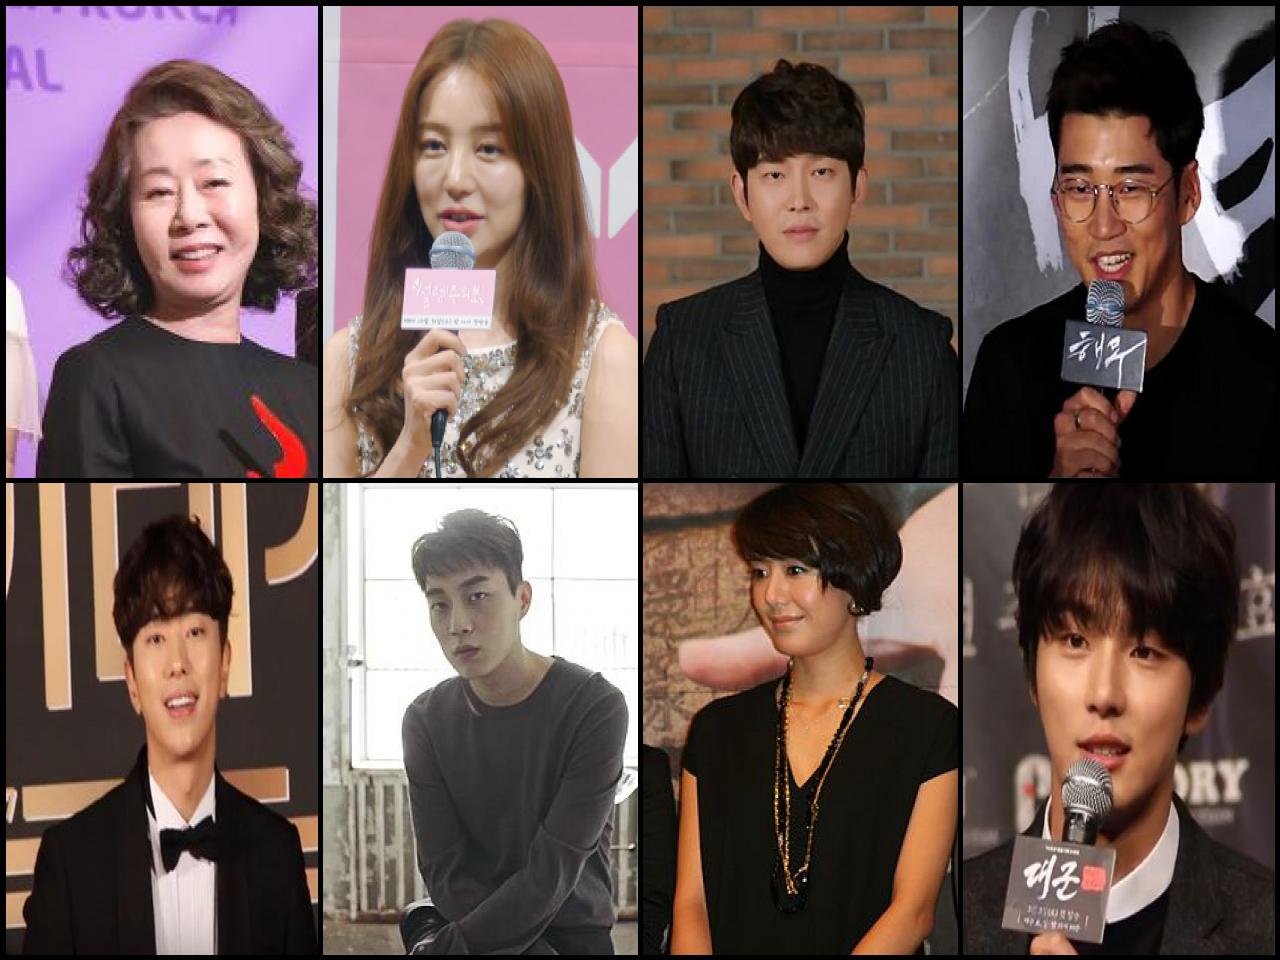 List of Famous people named <b>Yoon</b>